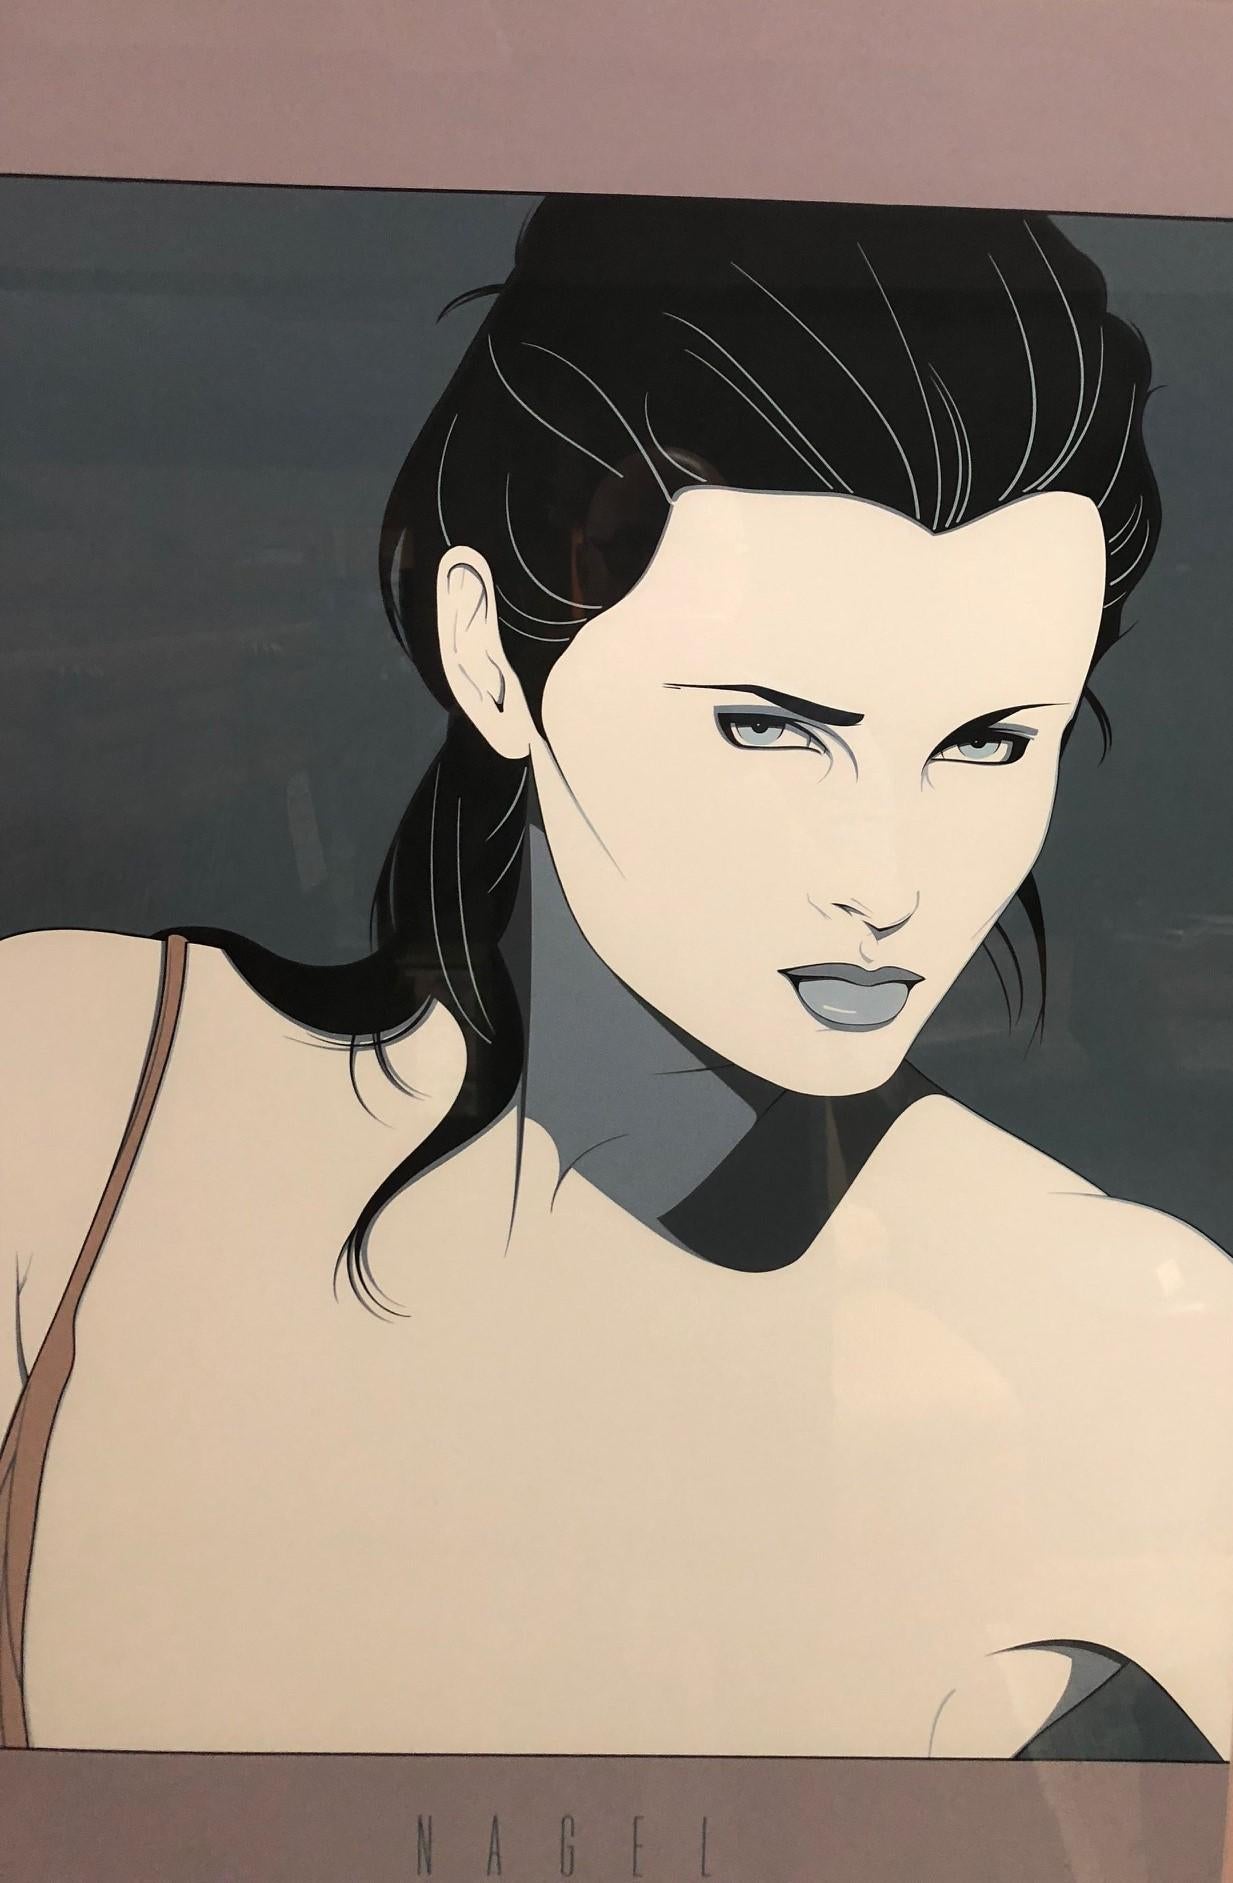 Limited edition serigraph (silkscreen) by Patrick Nagel published by Mirage Editions, Santa Monica, CA, circa early 1980s.

Patrick Nagel was an American artist who did work for Playboy magazine throughout the 1980's. He created popular